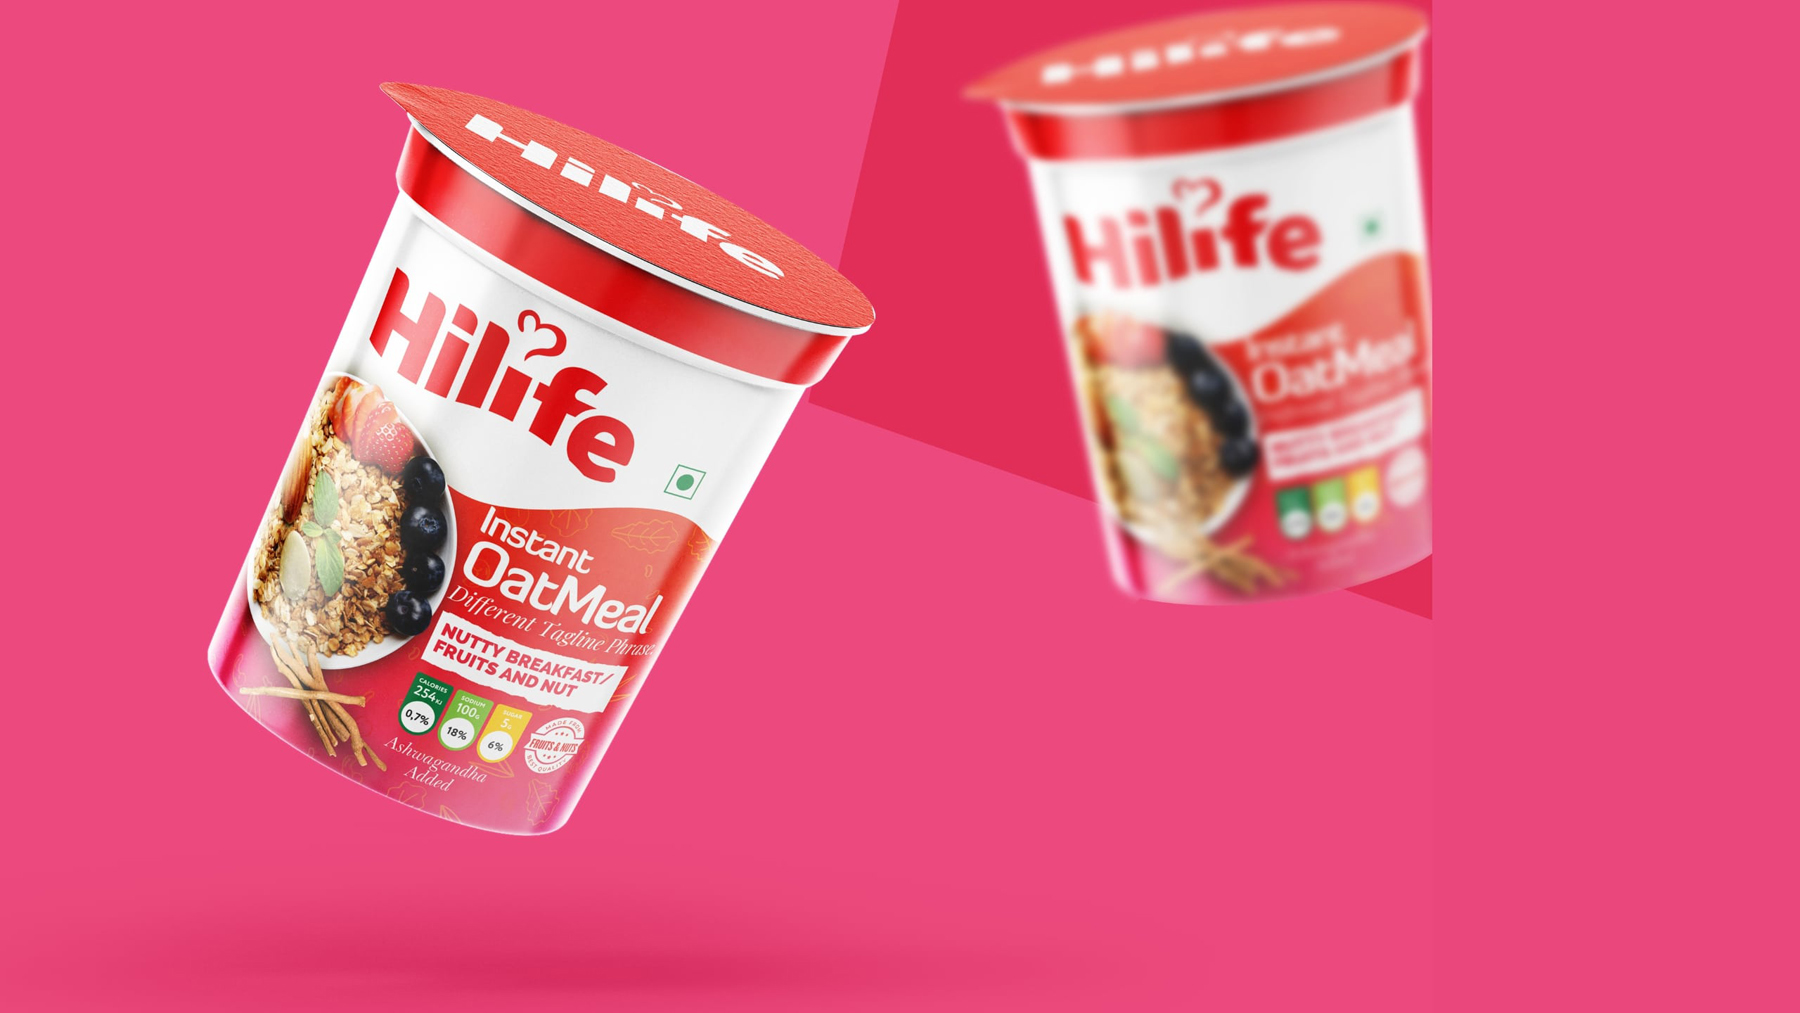 Hilife-Instant-Meal